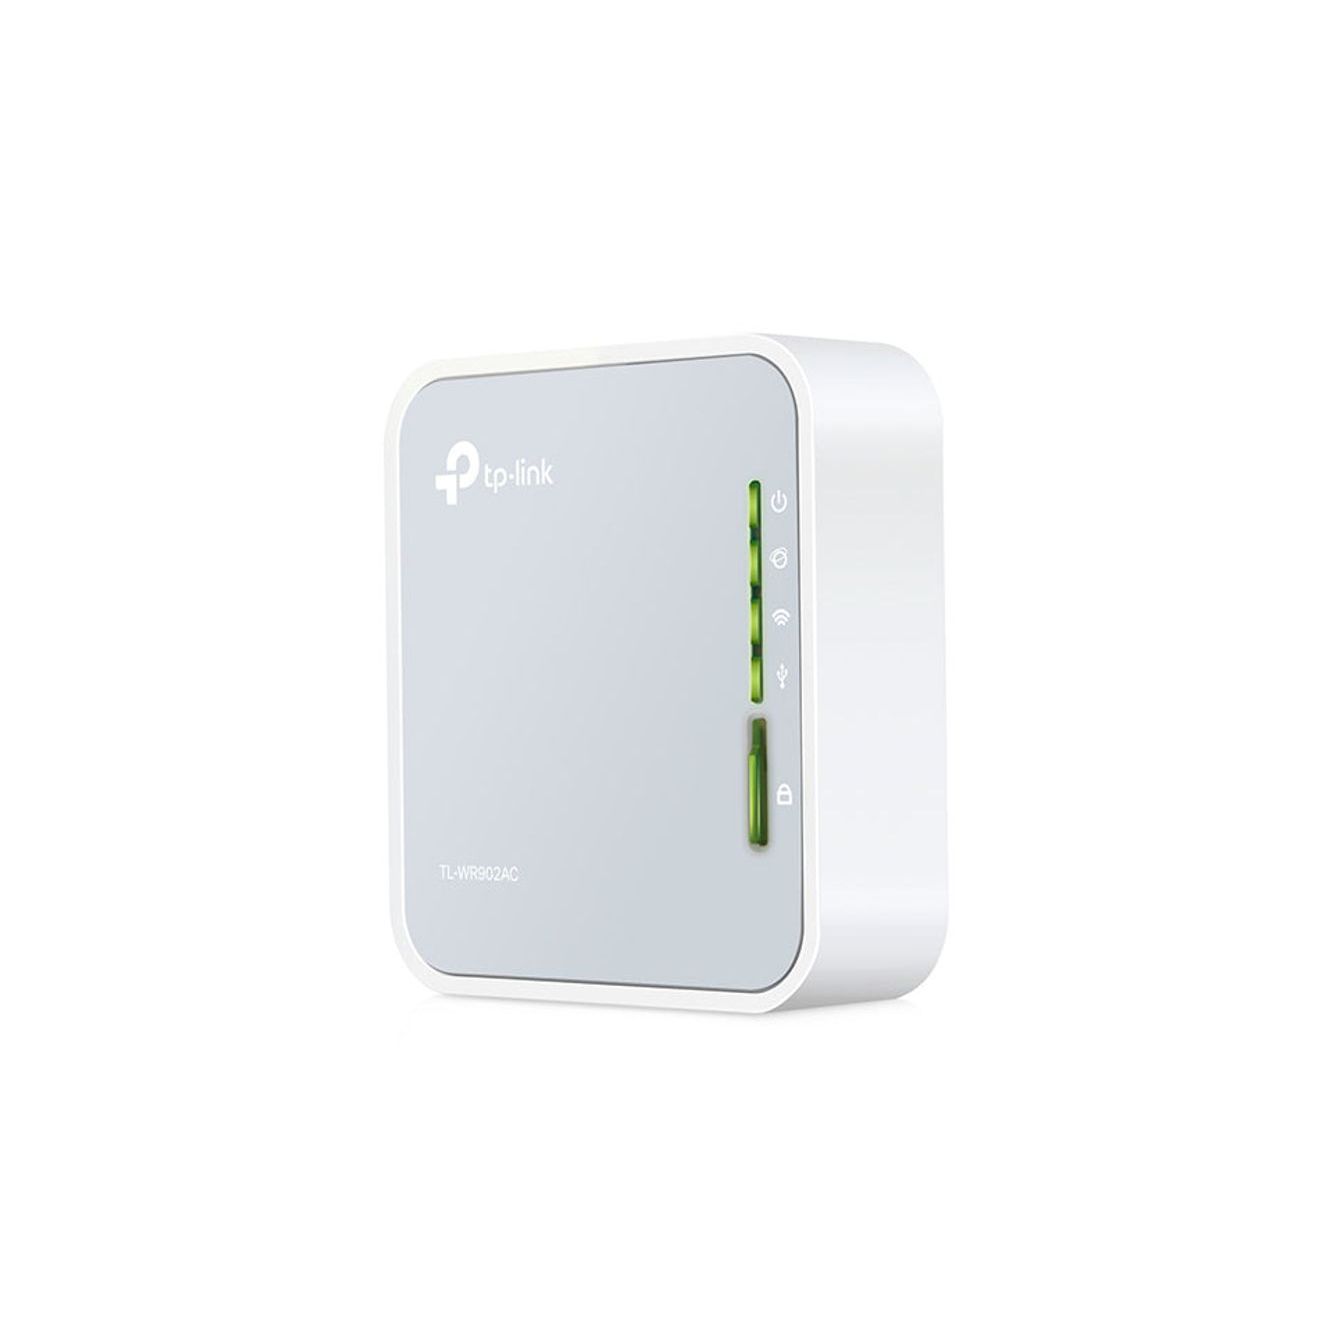 TL-WR902AC - TP-Link TL-WR902AC AC750 Wireless Travel Router